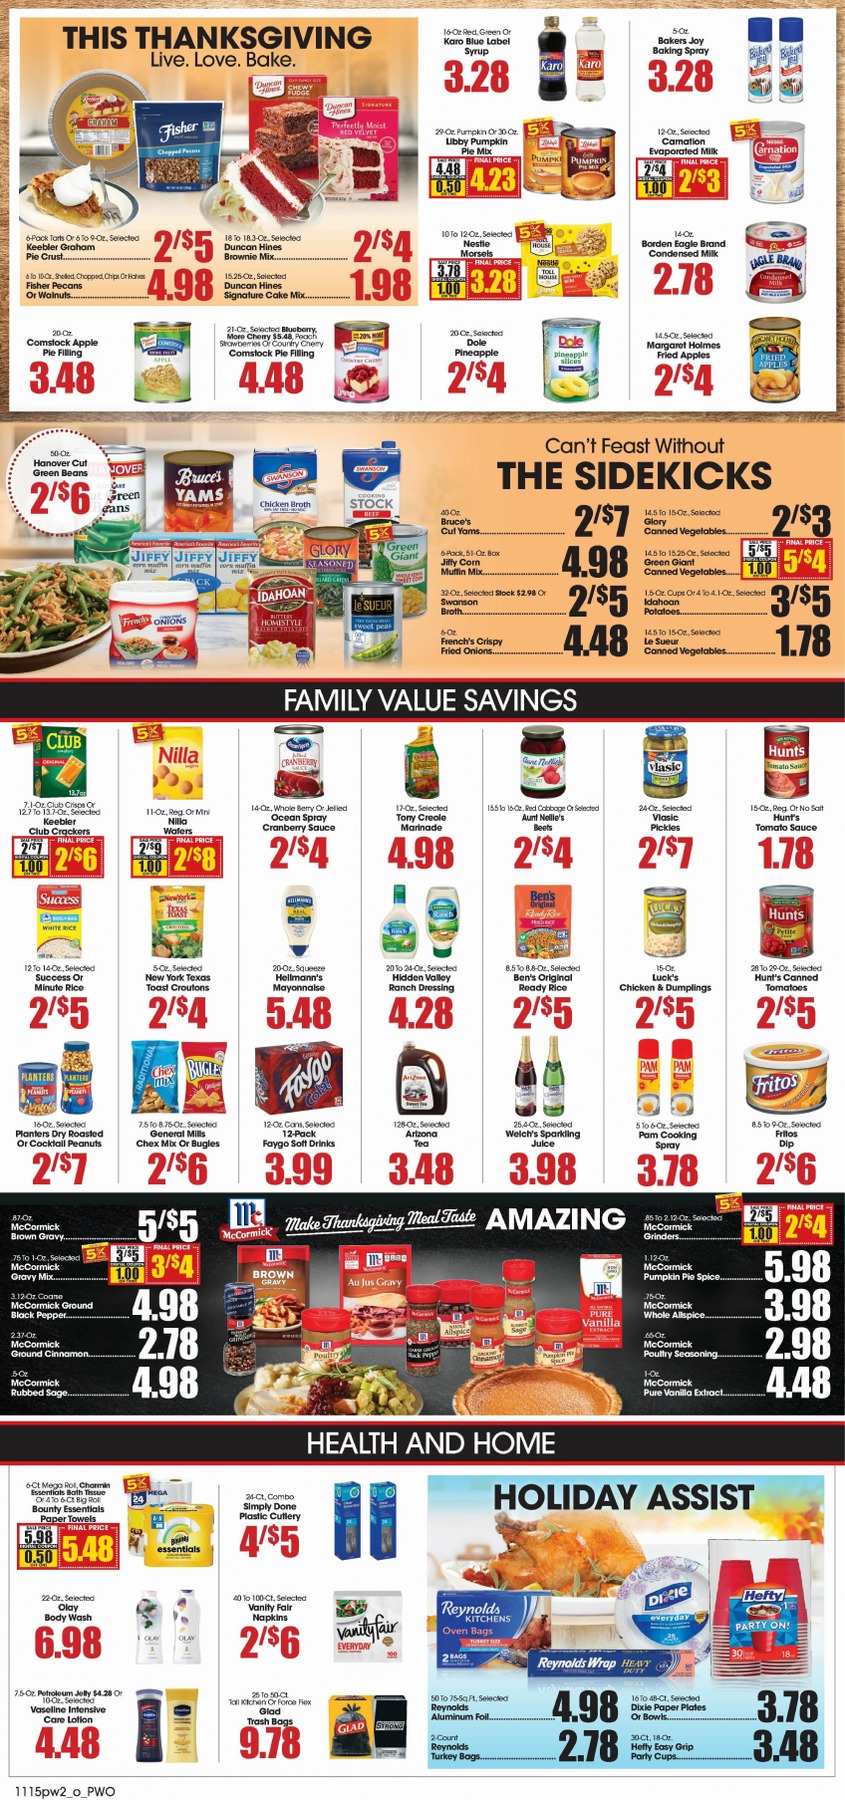 Piggly Wiggly Christmas Deals 2023 1 – piggly wiggly ad 8 2